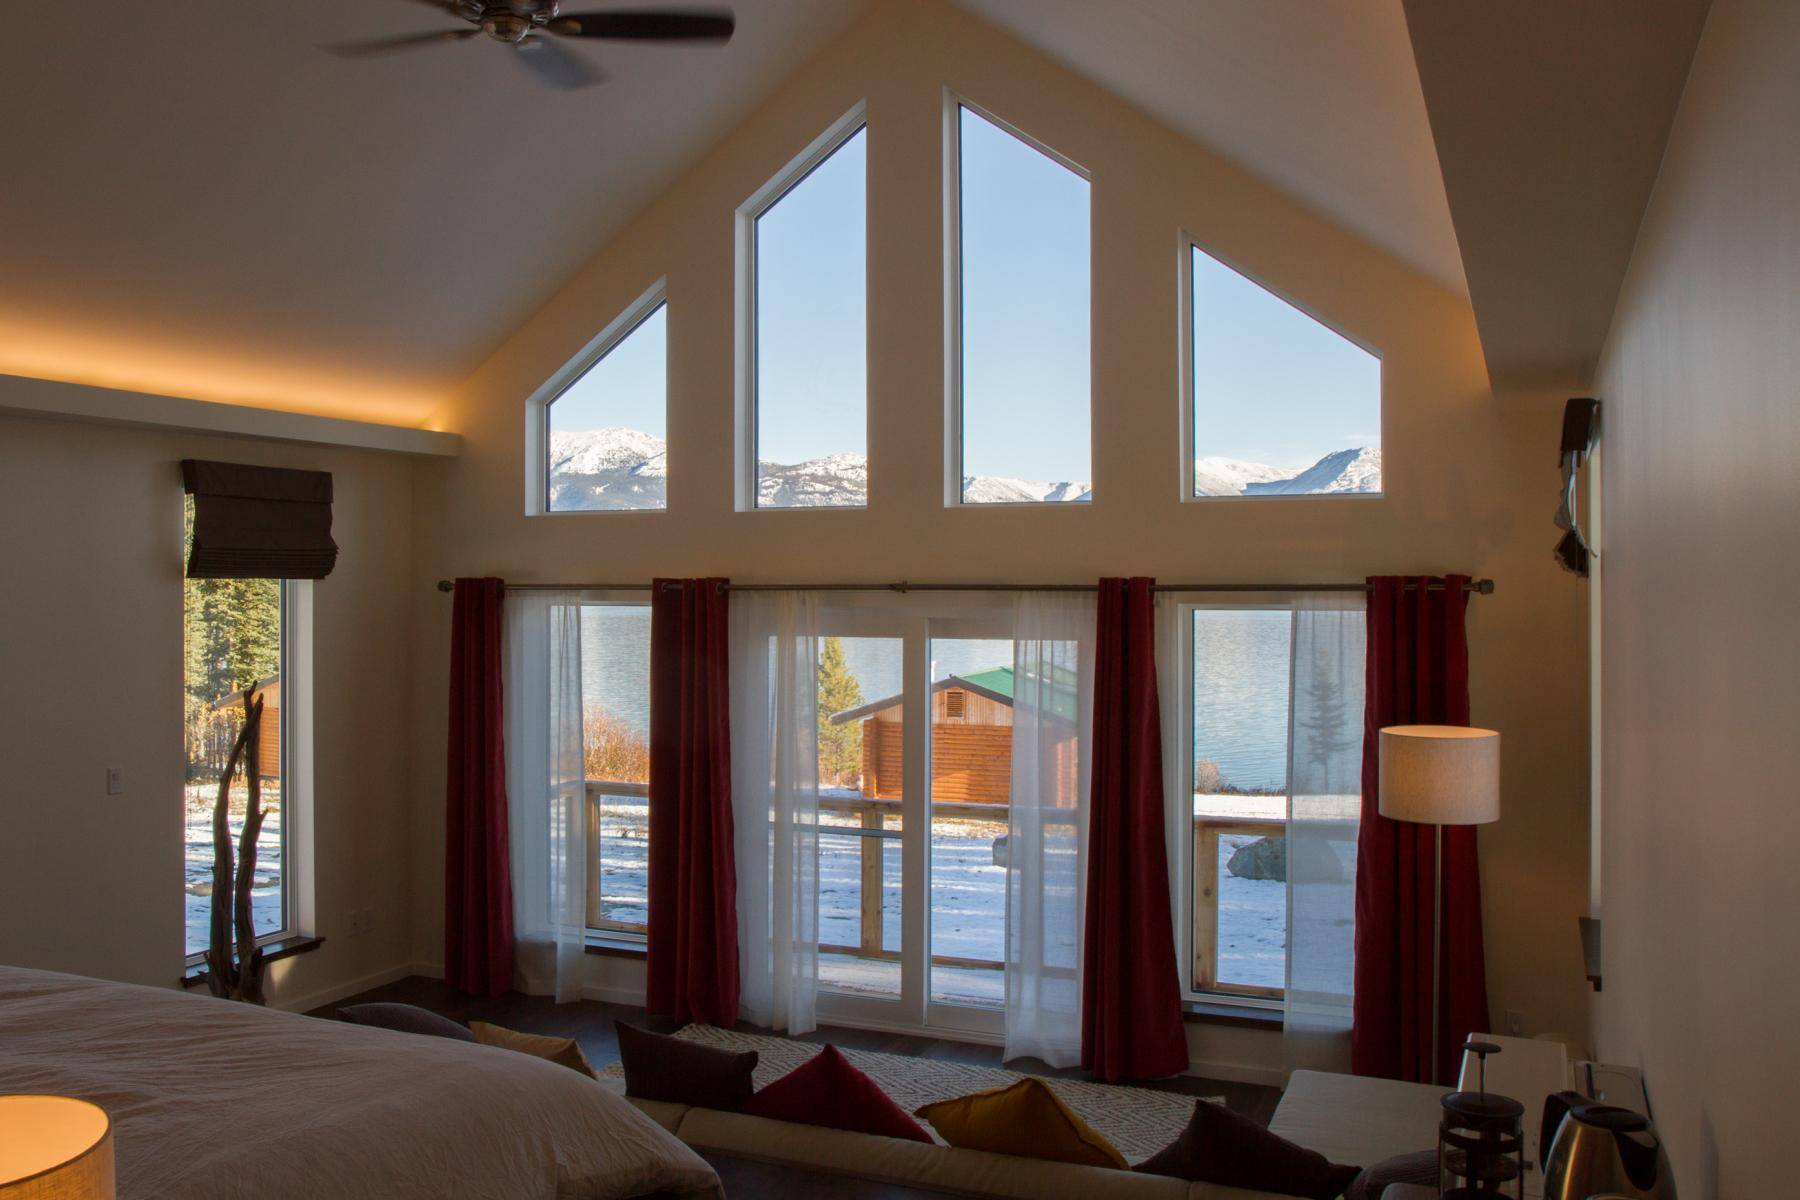 Deluxe villa interior showing the view outisde the panorama window to the lake and mountains